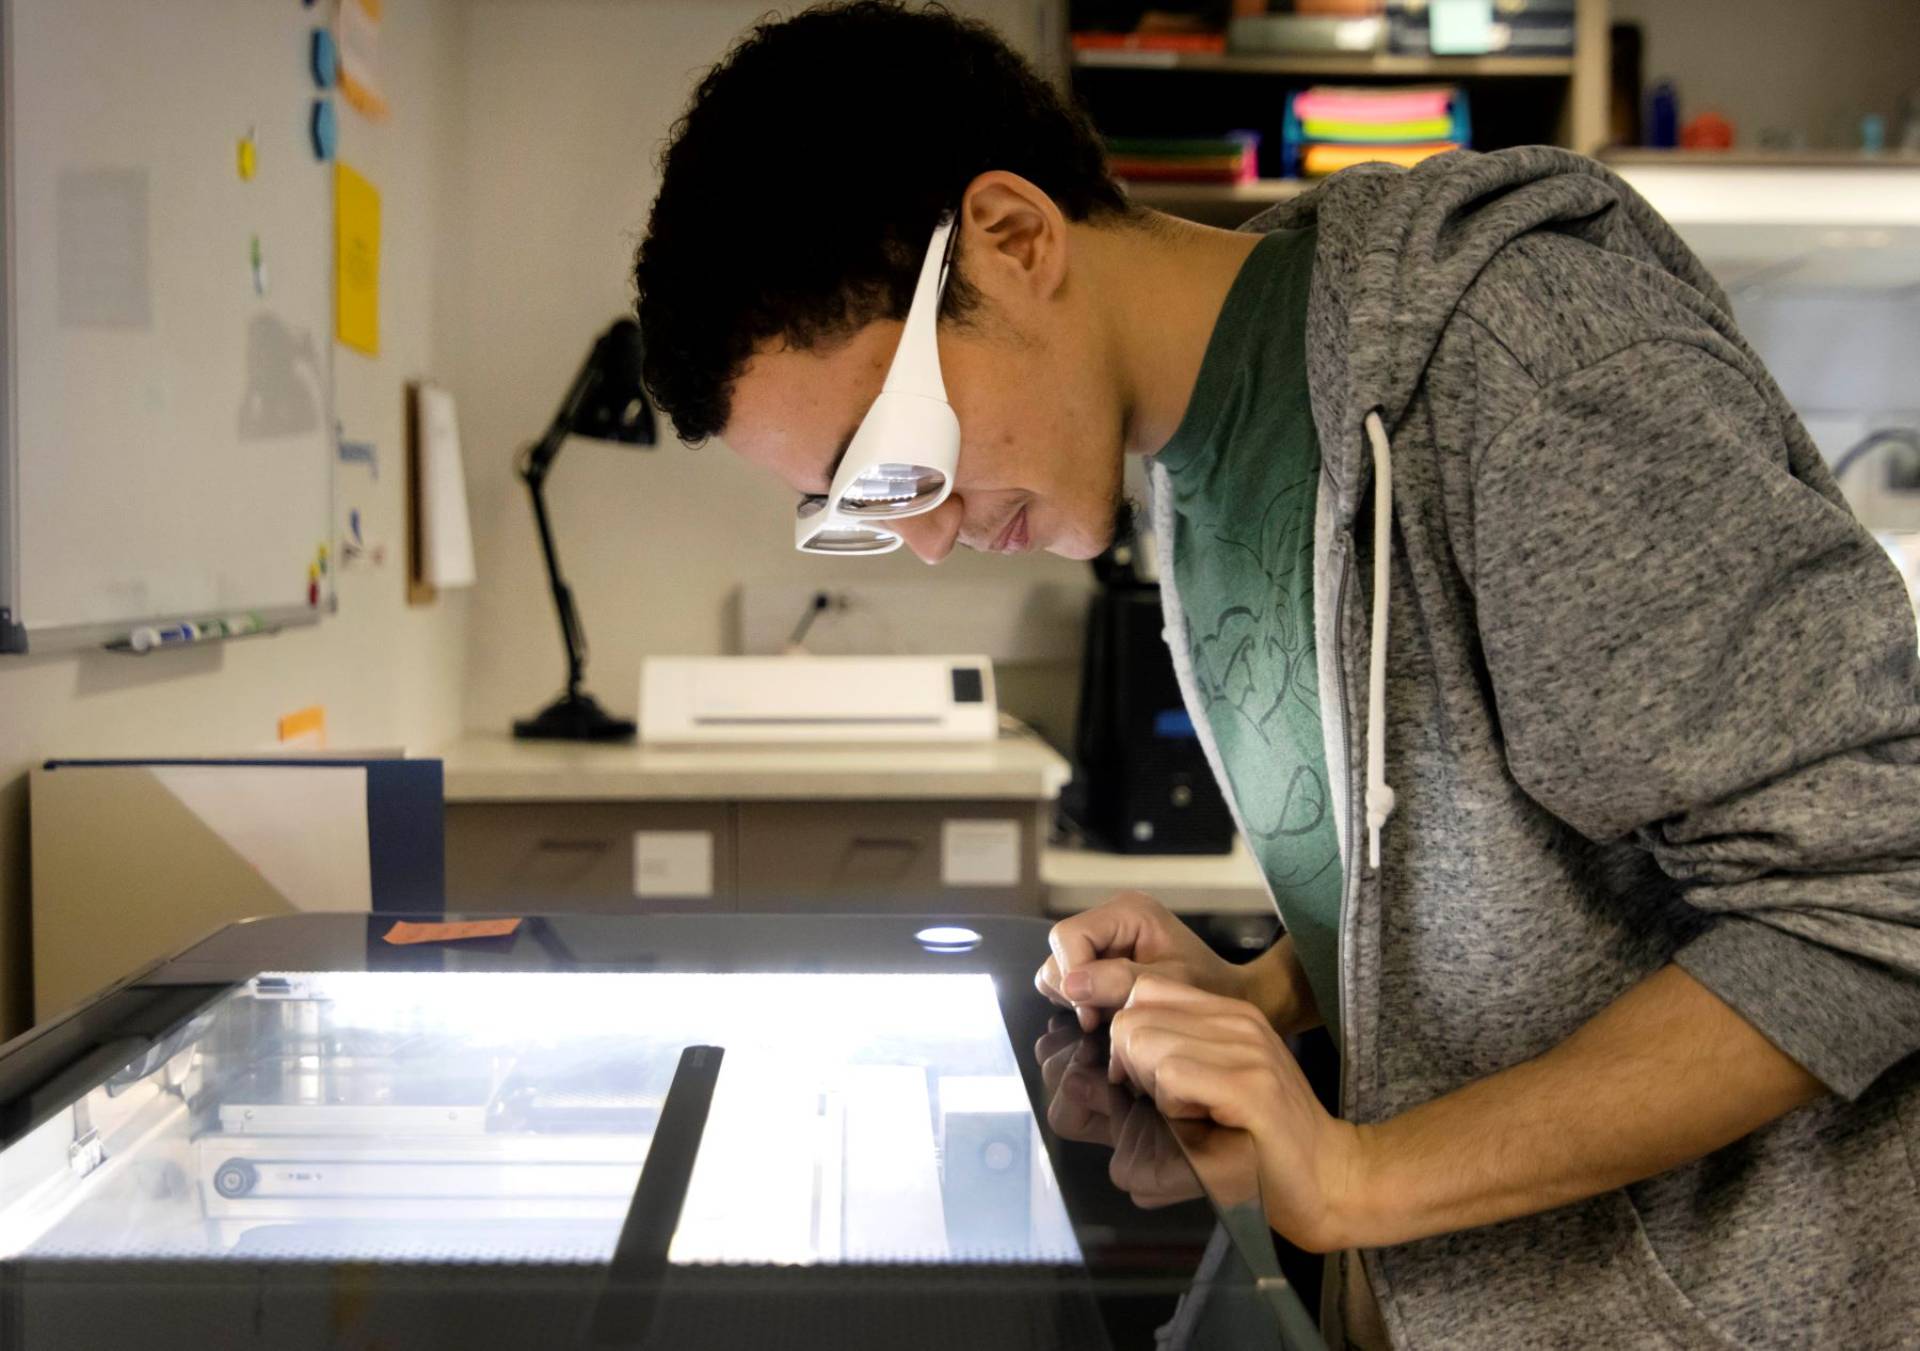 Student with protective eye gear leans over glass top to watch laser cutter.